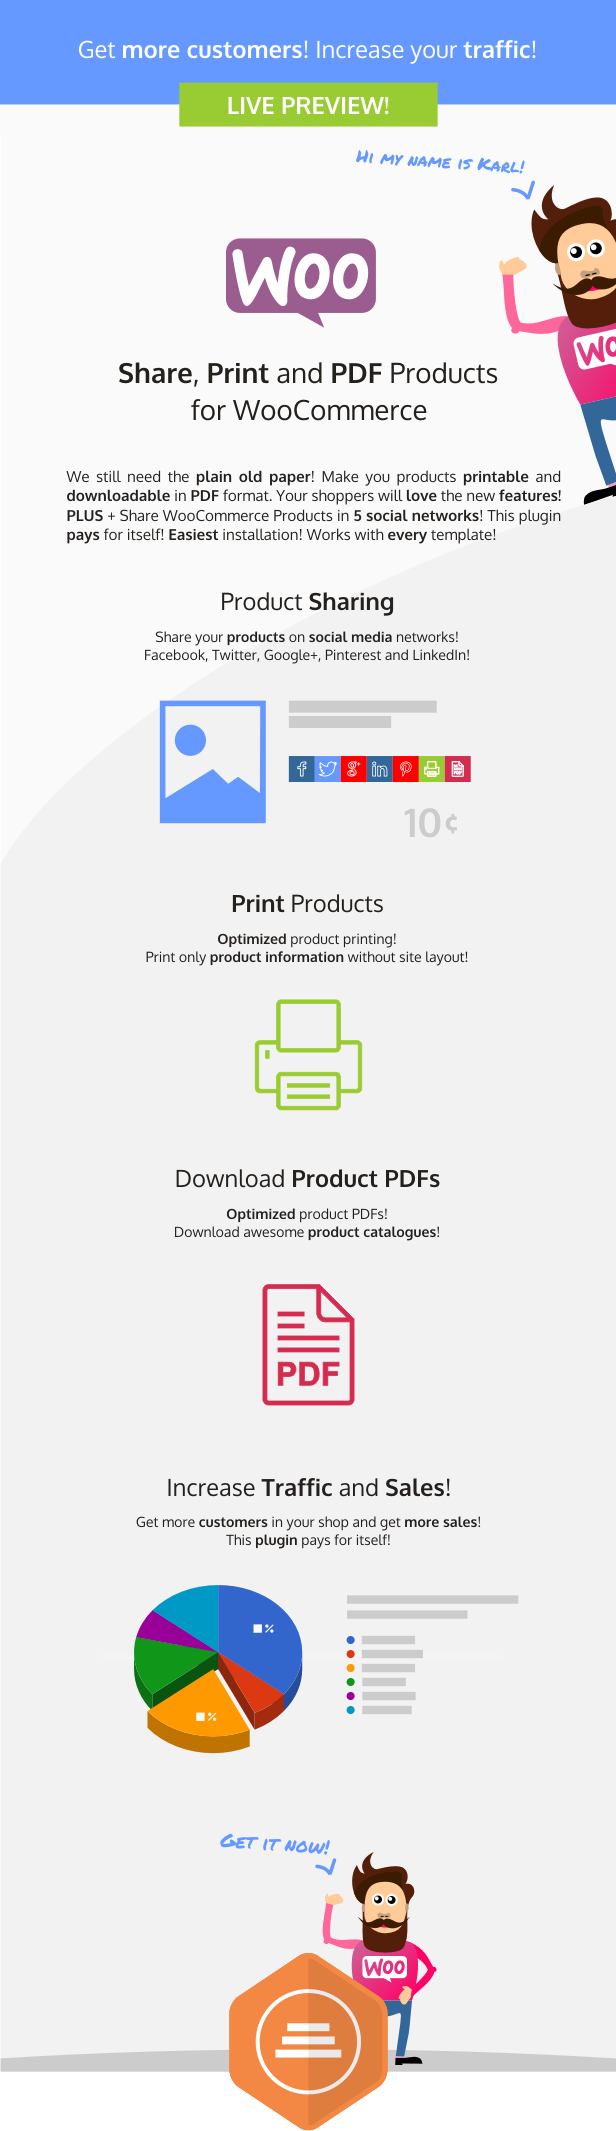 Share, Print and PDF Products for WooCommerce - 2